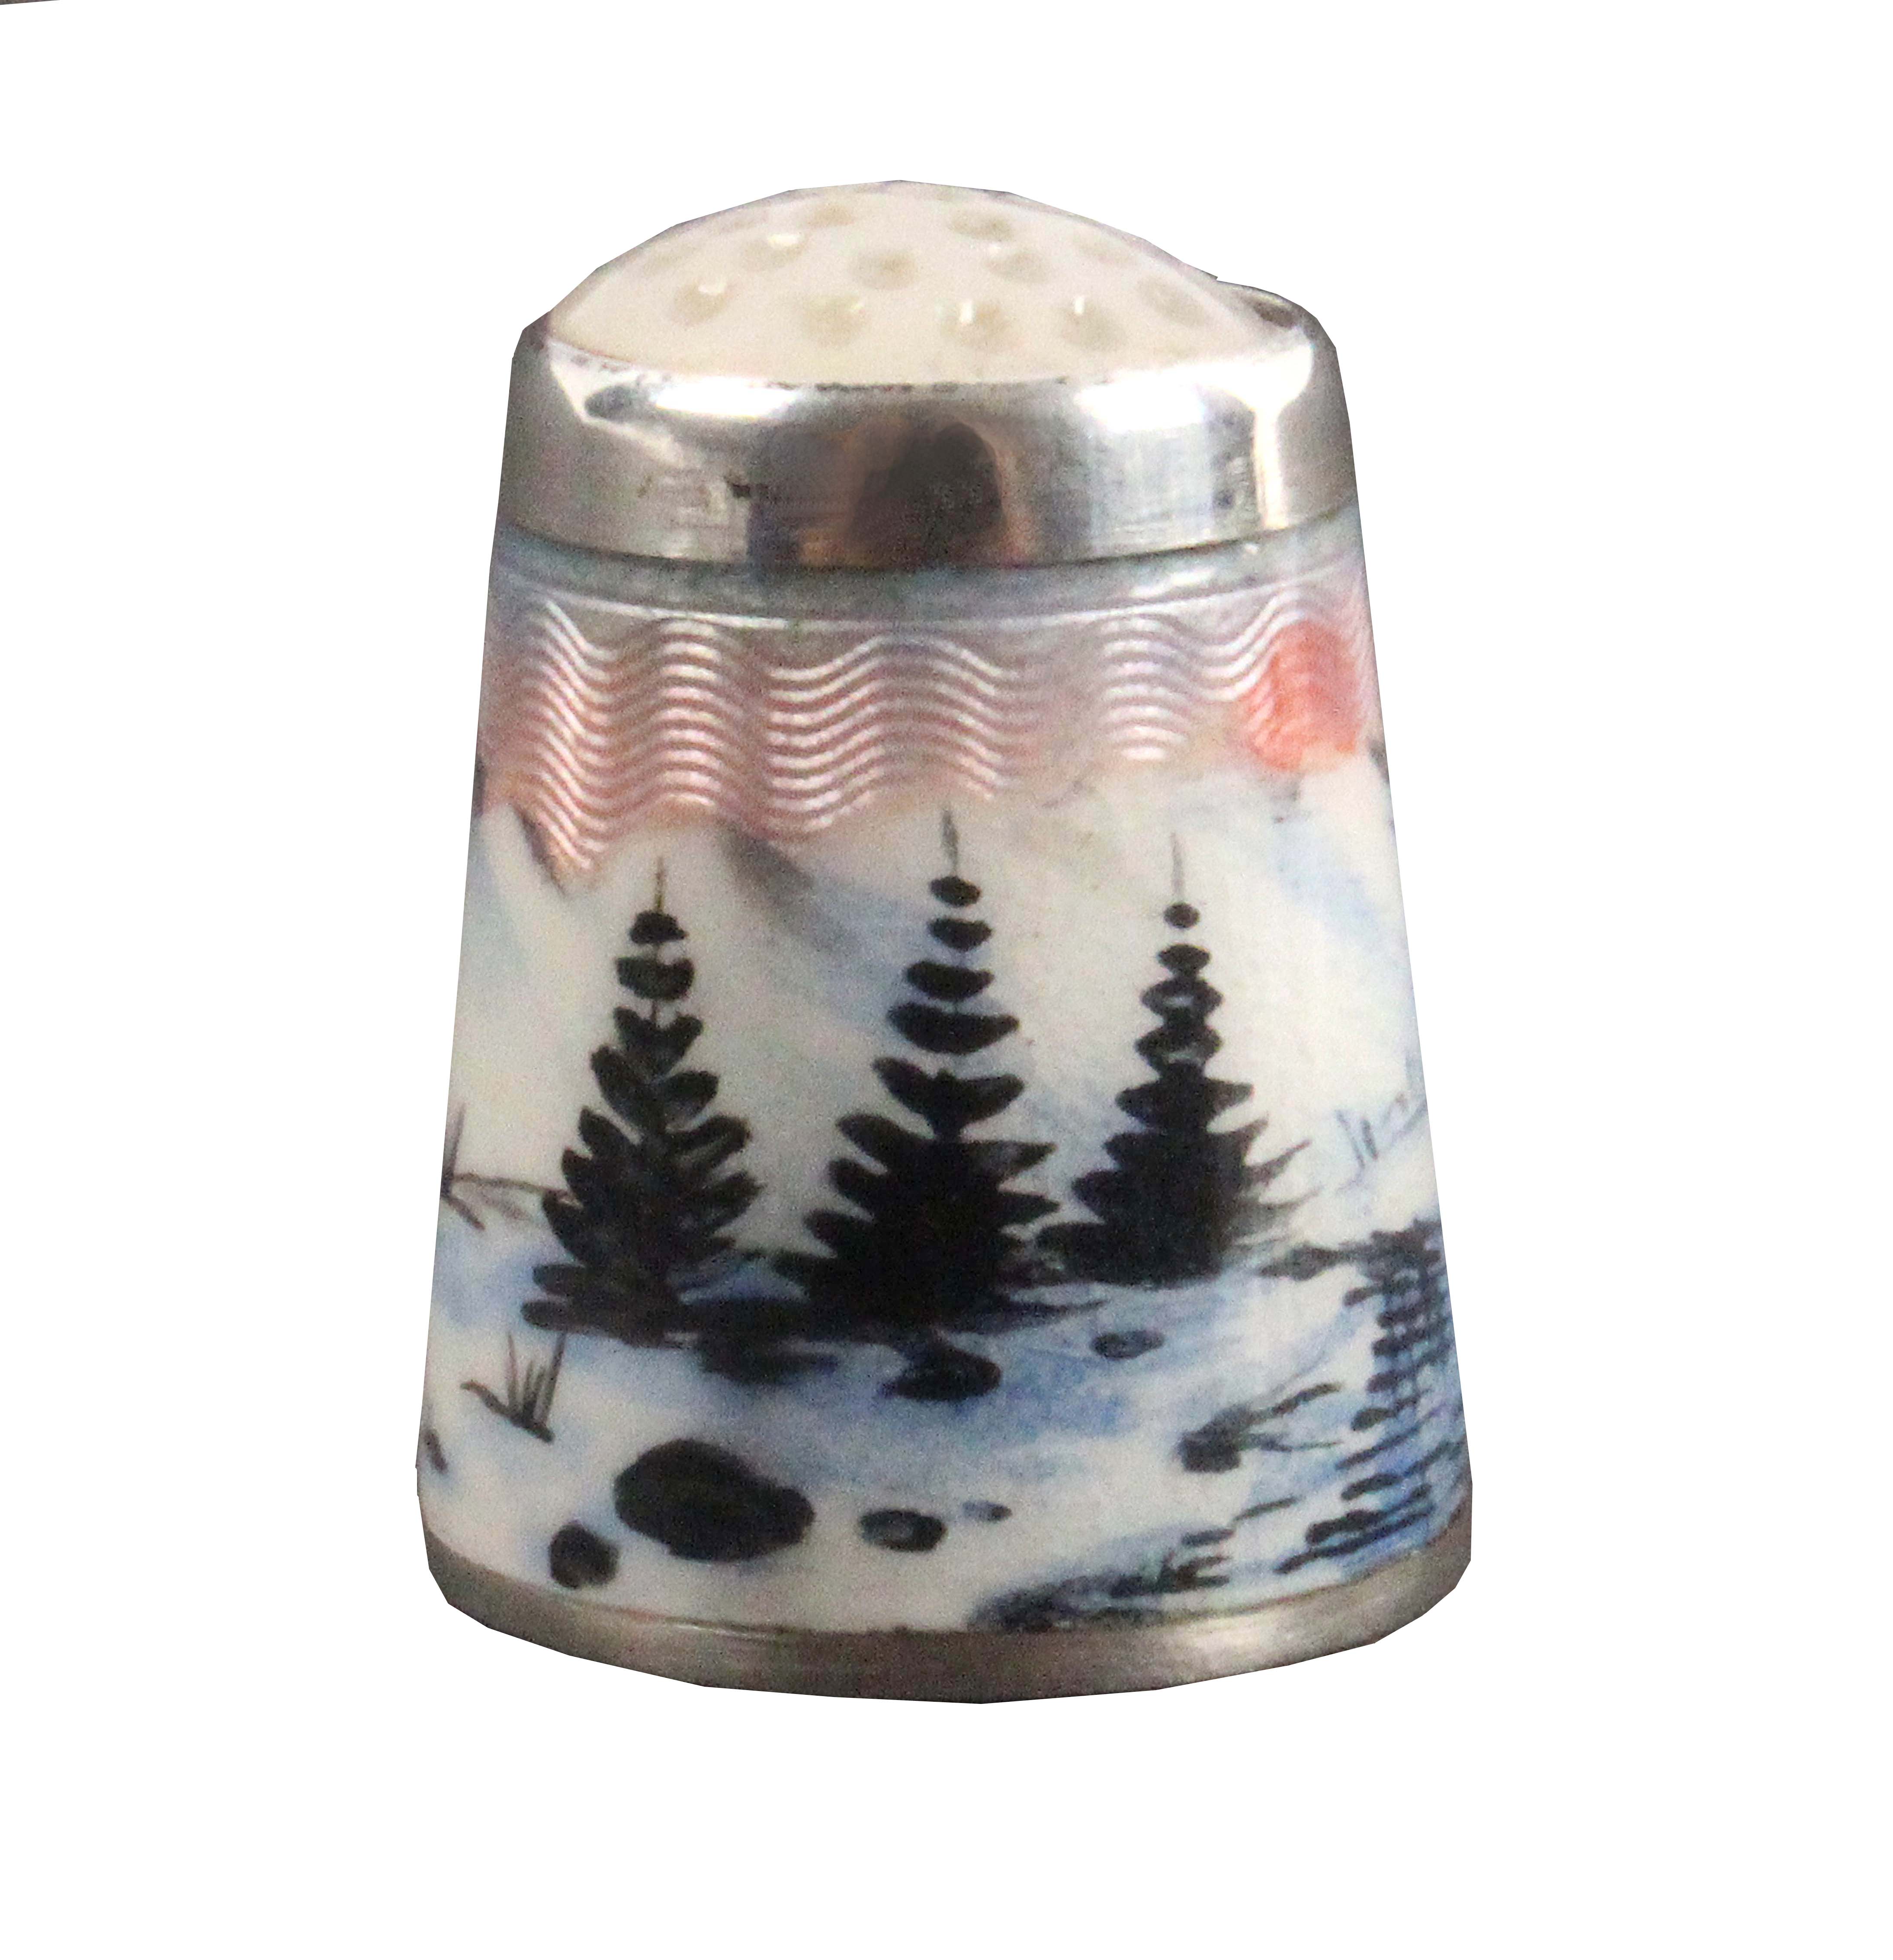 A Norwegian silver and enamel thimble, depicting a river, pine trees, in a snowy mountainous